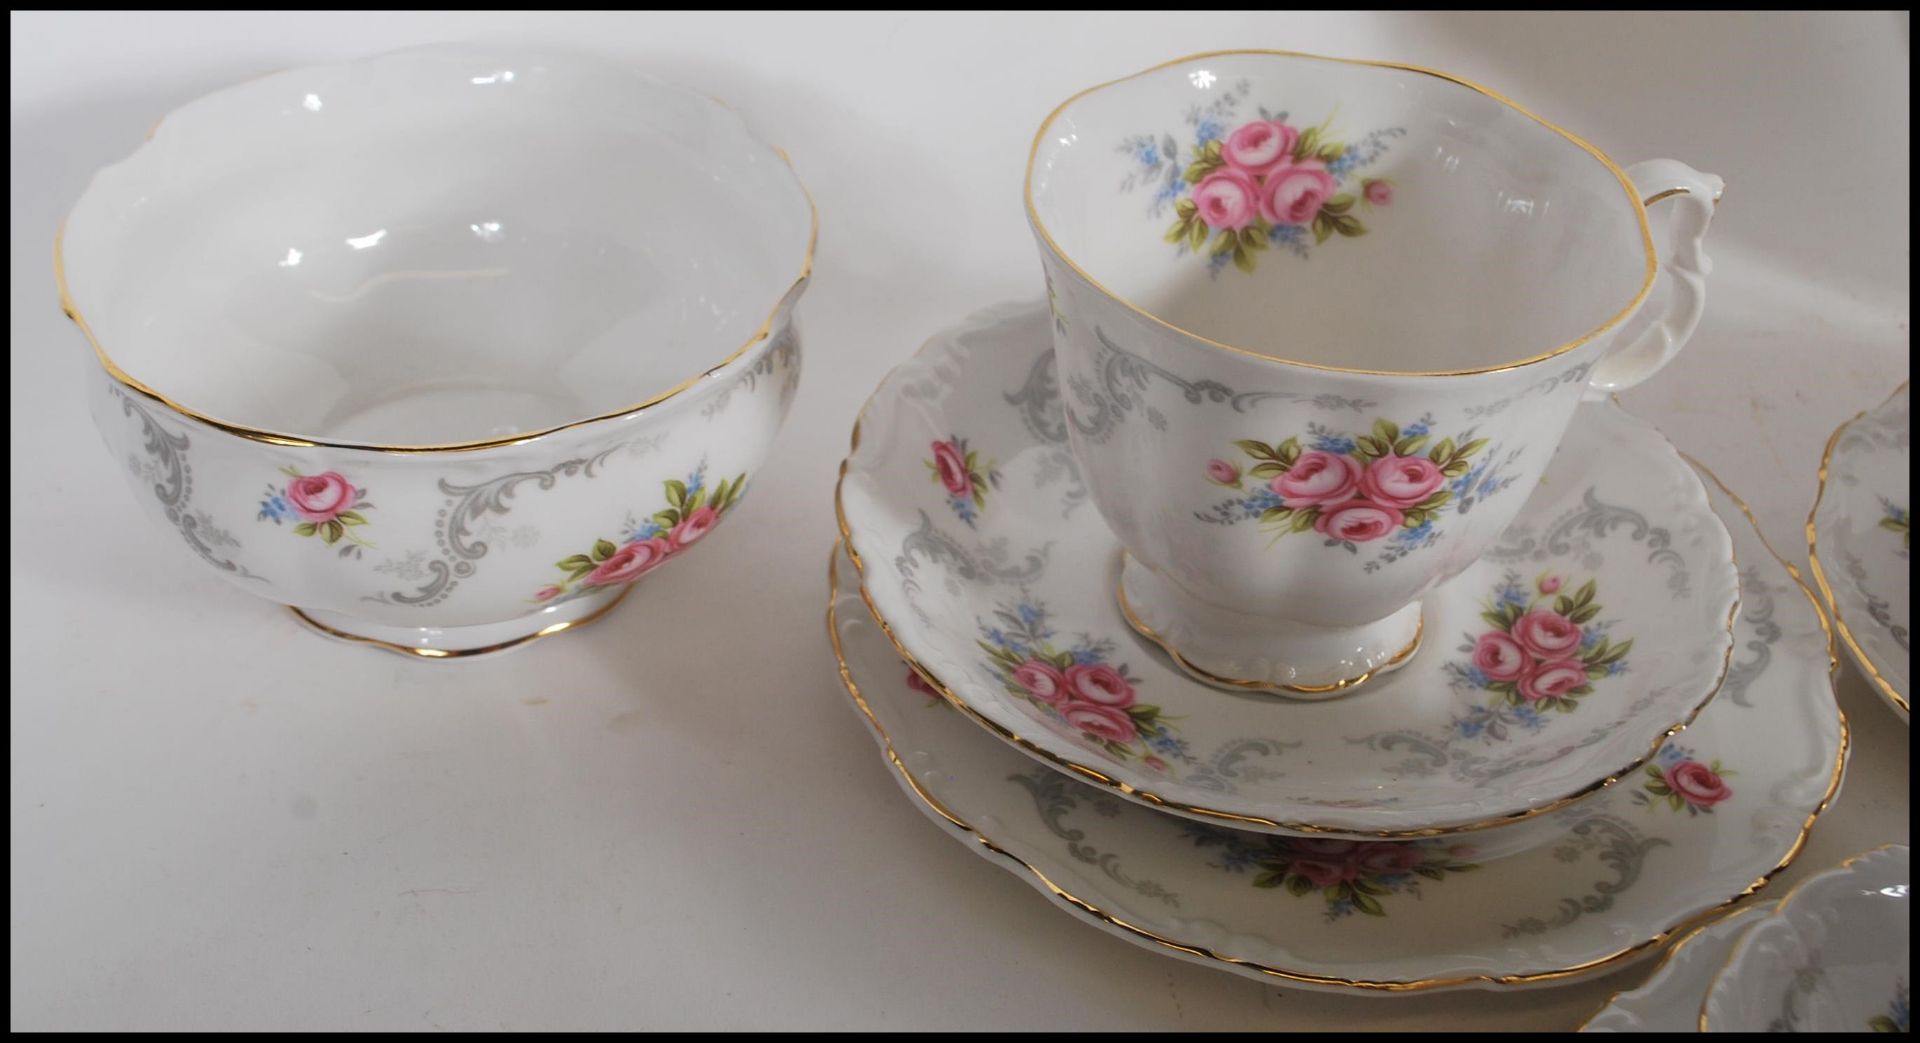 A Royal Albert tea service in the Tranquillity pattern having floral and gray foliate decoration - Image 7 of 8